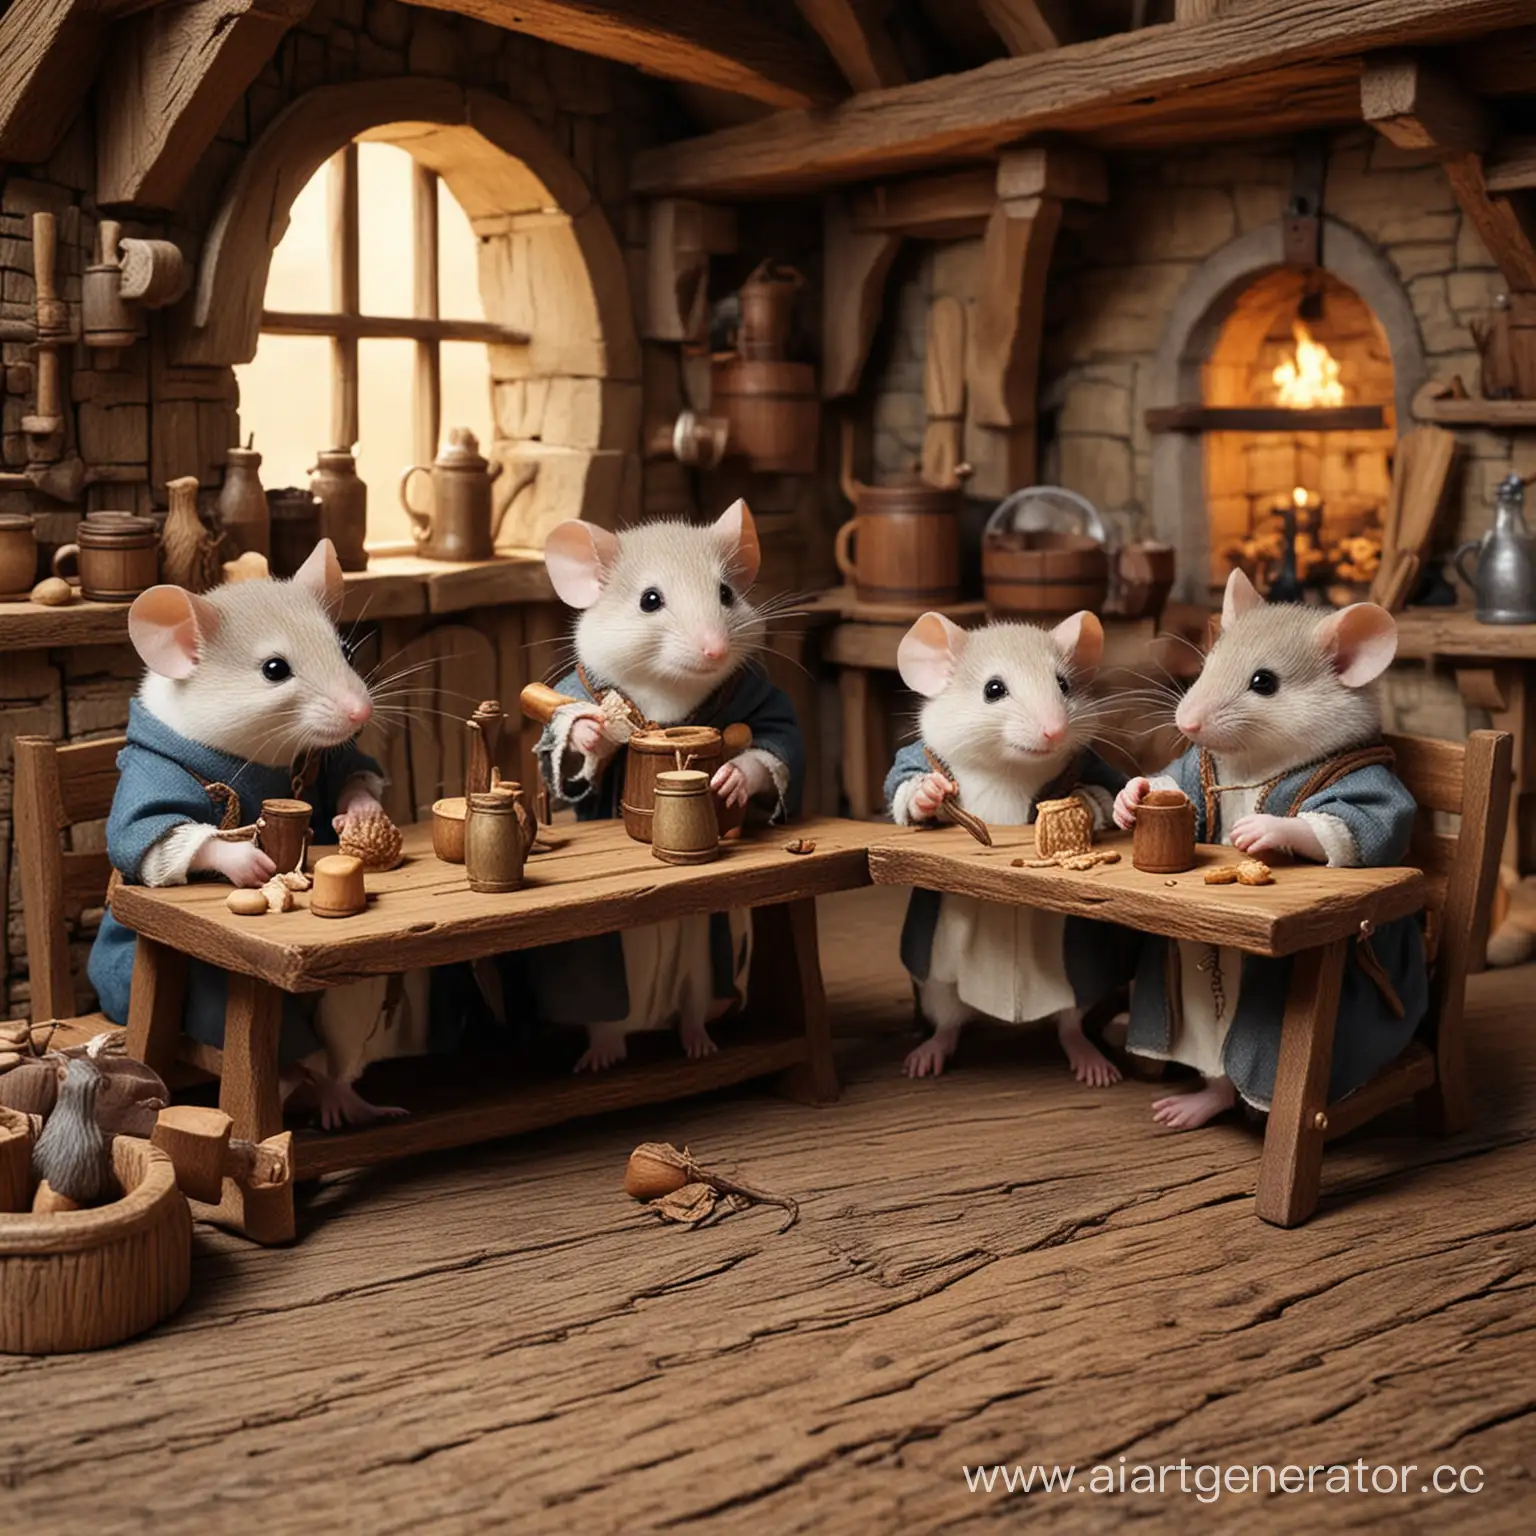 Medieval-Tavern-Scene-with-Four-Mice